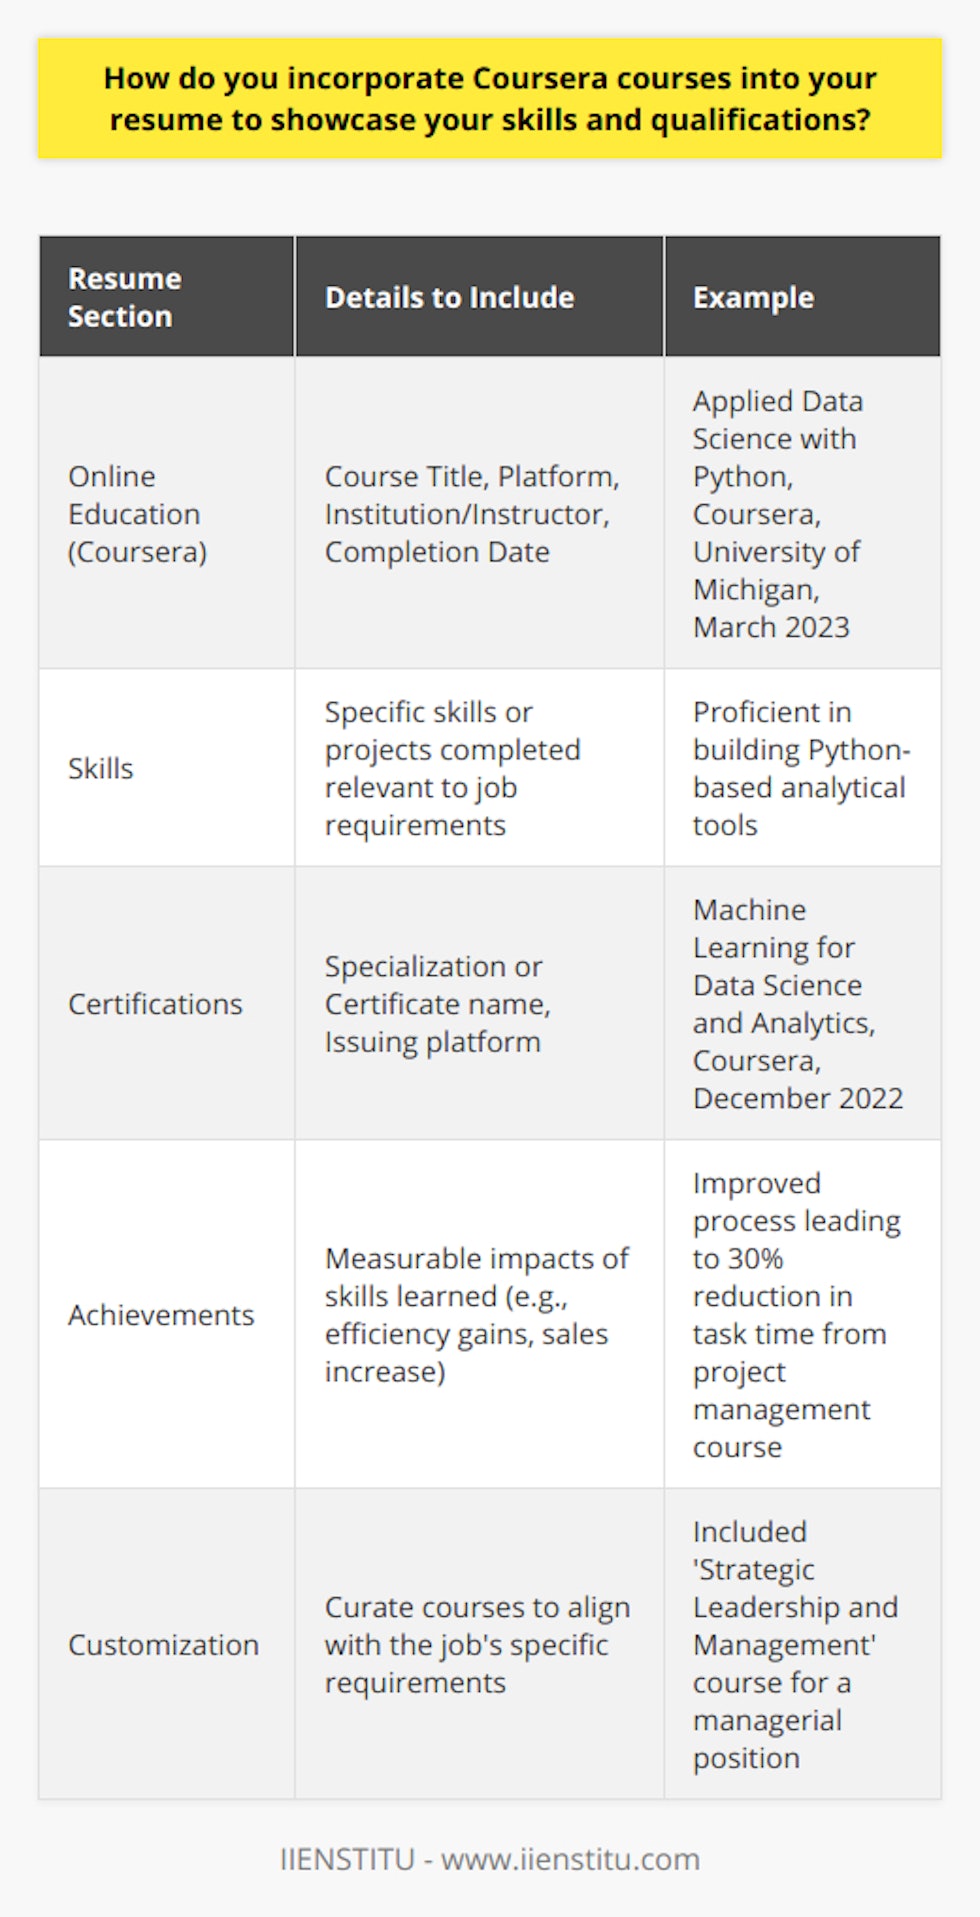 When incorporating Coursera courses into your resume, it is pivotal to do so in a way that demonstrates the value of your self-driven education and its relevance to the job for which you are applying. Here is how to present your Coursera coursework effectively:**Create a Dedicated Section for Online Education**Consider adding a dedicated 'Online Education' or 'Continuing Education' section if the Coursera courses you've taken are highly relevant to the job you're seeking. Within this section, list the most pertinent courses. Include the course title (Data Science Specialization), the platform (Coursera), the institution or instructor if notable, and the completion date.For example:**Online Education (Coursera):**- Applied Data Science with Python, University of Michigan, March 2023- Strategic Leadership and Management, University of Illinois, January 2023**Align With Job Requirements**Analyze the job description and identify the key skills and qualifications required. Reflect on your Coursera courses and select those which align best with these requirements. For instance, if the job requires expertise in project management, include completed courses that cover this area, highlighting any specific methodologies you’ve learned.**Focus on Achievement and Skills**Within the courses, you may have completed significant projects or gained particular recognition. Highlight these accomplishments. For example, if you completed a capstone project that solved a real-world problem or simulated a common industry challenge, mention it succinctly.Moreover, translate the competencies you've gained into tangible skills in the 'Skills' section of your resume. Instead of saying Took a course in Python, be specific about your capabilities: Proficient in building Python-based analytical tools.**Include Certificates and Specializations**If you've earned a certificate or completed a Coursera specialization, include this in the 'Certifications' section of your resume. Clearly state the specialization, the credential obtained, and the issuing platform. For instance:**Certifications:**- Machine Learning for Data Science and Analytics, Coursera, December 2022**Quantify Achievements**Should your online coursework directly relate to any measurable achievement in your professional or academic career, make sure to include this information. For example, if you applied skills learned from a Coursera course to increase sales by 20% or to improve a process that resulted in a 30% reduction in time spent on a task, state this on your resume.**Tailor for Each Application**Tailoring your resume for each application is crucial. Curate the Coursera coursework you include for each job and focus on the relevance to the position you're targeting. Choose courses that directly support your suitability and potential to excel in the role.By methodically selecting, detailing, and situating your Coursera coursework on your resume, you can effectively convey the value of your online learning endeavors and distinguish yourself as a committed and resourceful professional. Remember that transparency, relevance, and clarity are key to helping potential employers recognize the applicability of your Coursera-acquired knowledge and skills.